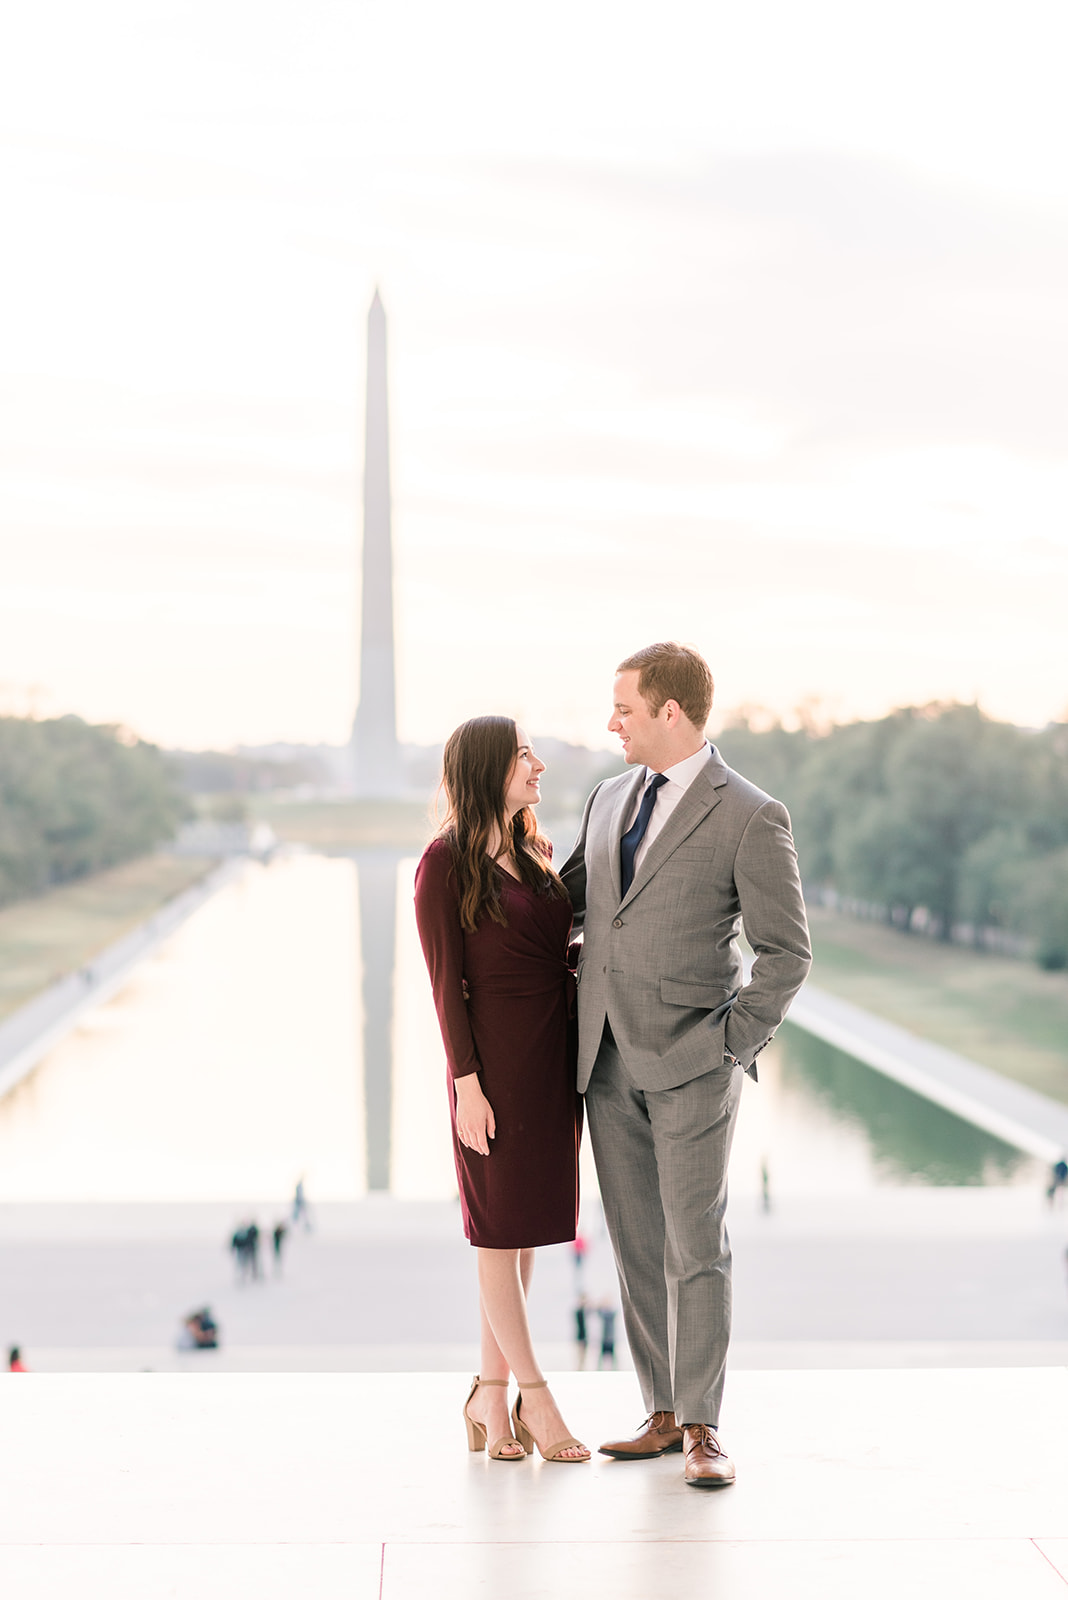 Melissa and Aaron – Engaged